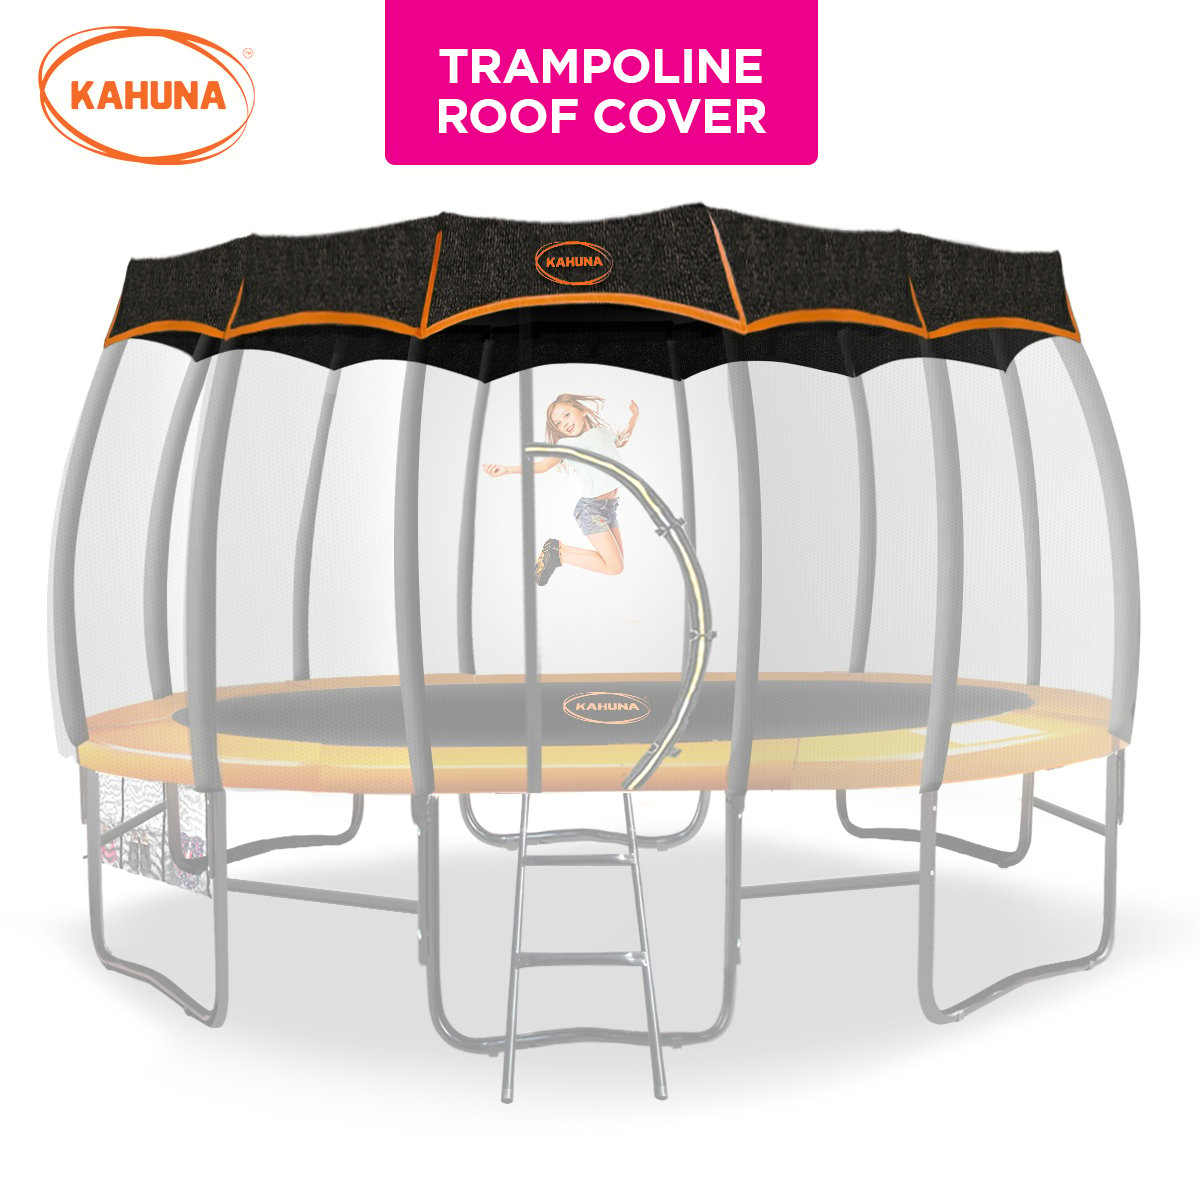 Kahuna 12ft Removable Twister Trampoline Roof Shade Cover 1